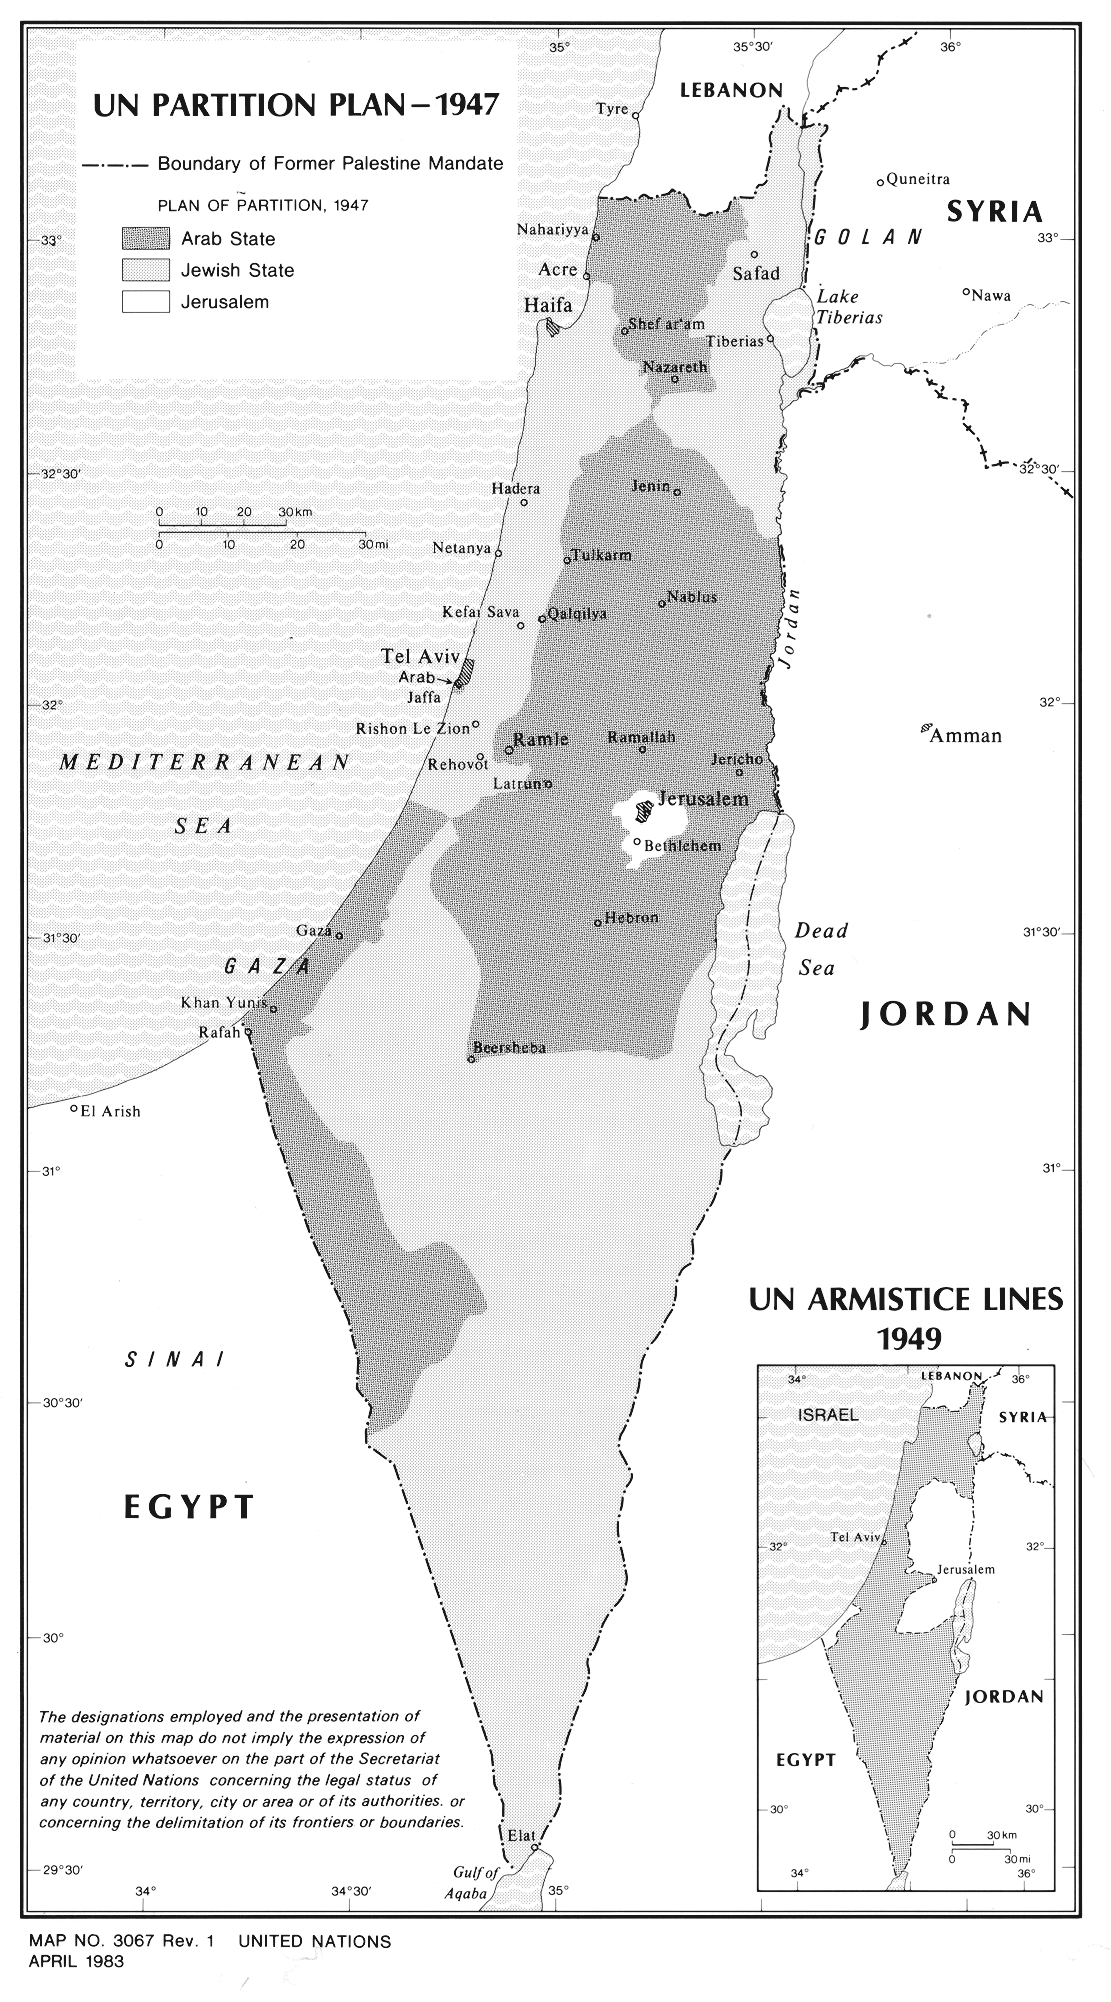 Map of the UN partition plan for Palestine, November 29, 1947. (United Nations Information System on Palestine)